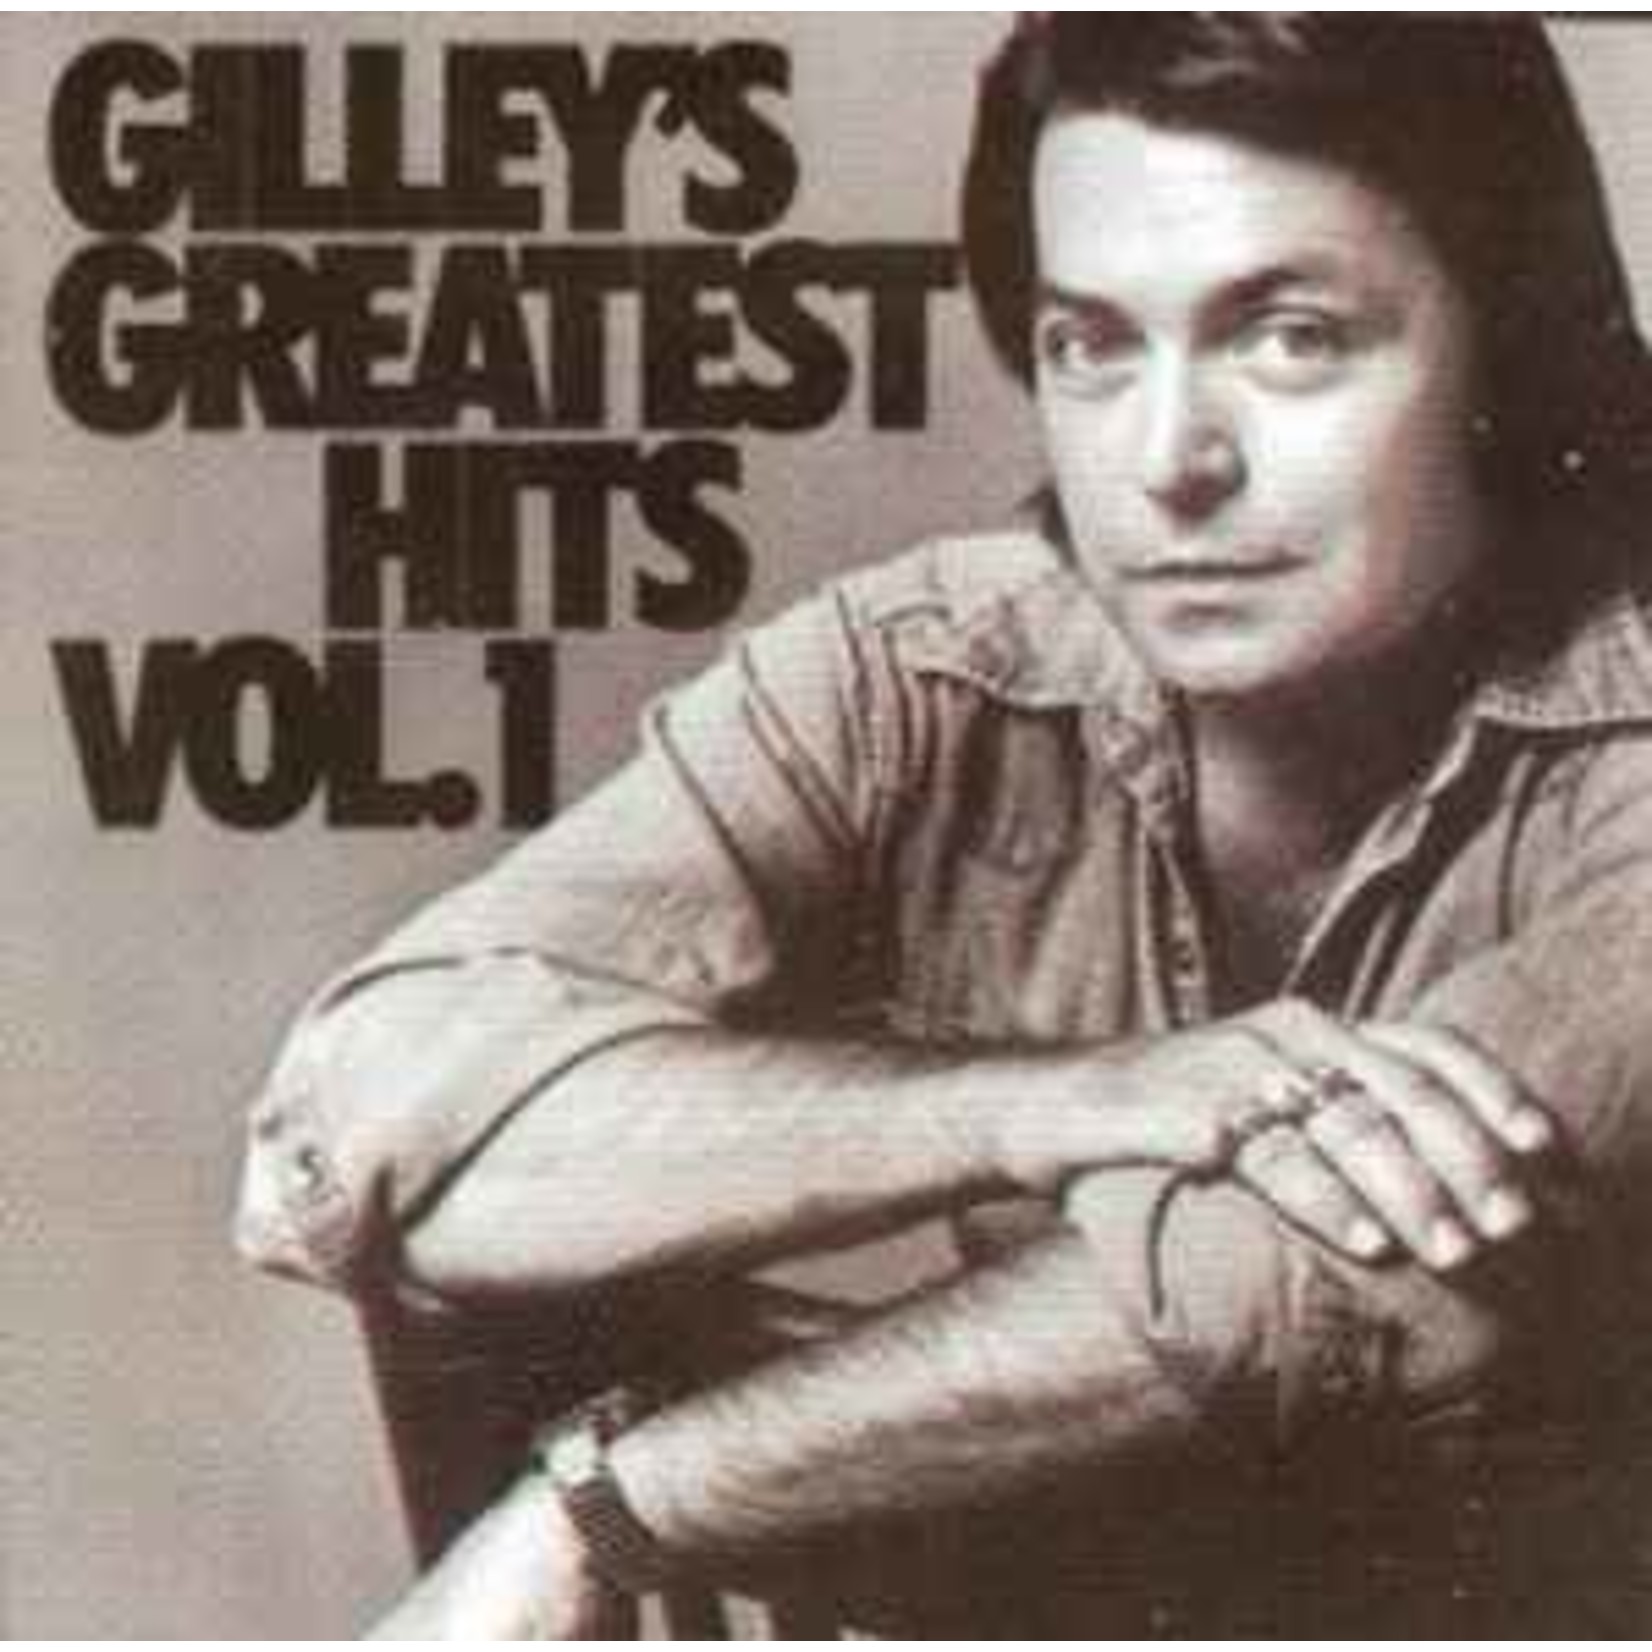 [Vintage] Mickey Gilley - Greatest Hits Vol. 1